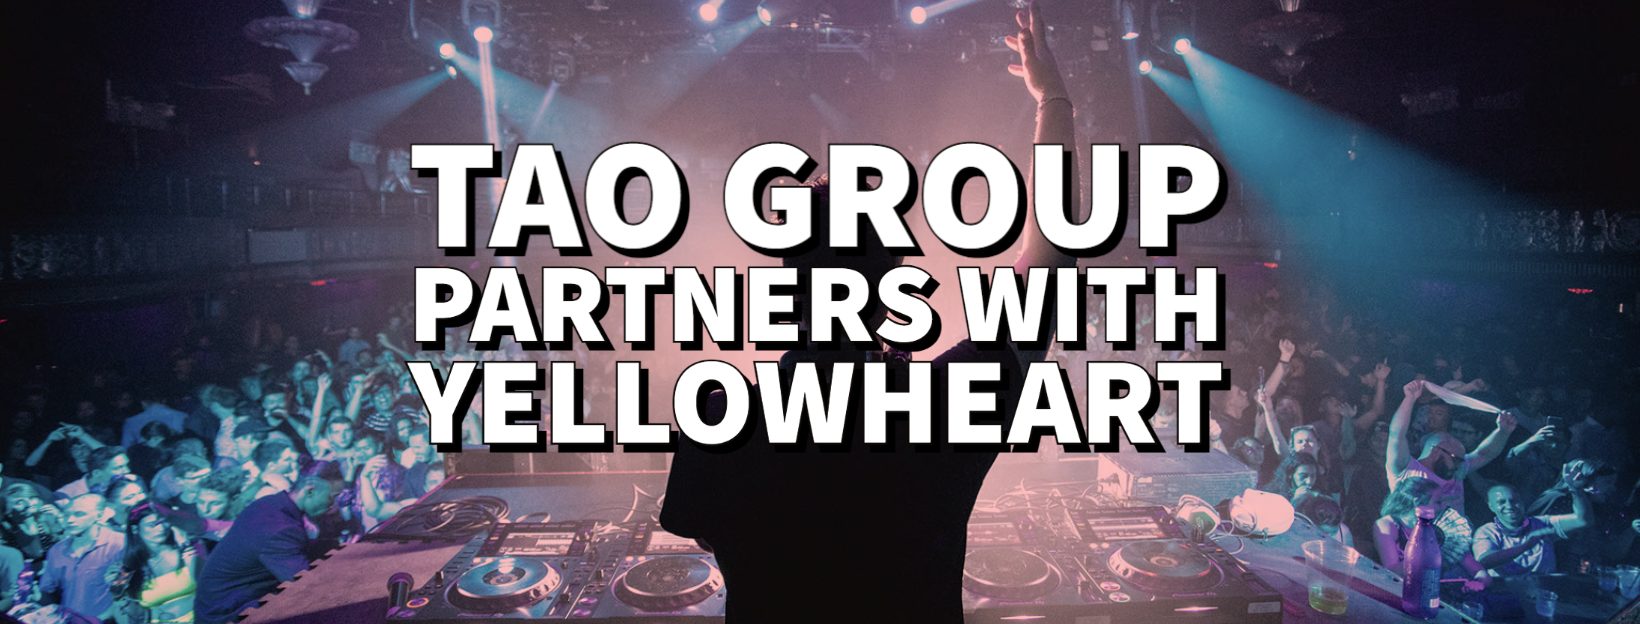 TAO GROUP HOSPITALITY PARTNERS WITH  YELLOWHEART TO INTRODUCE NFT TICKETING